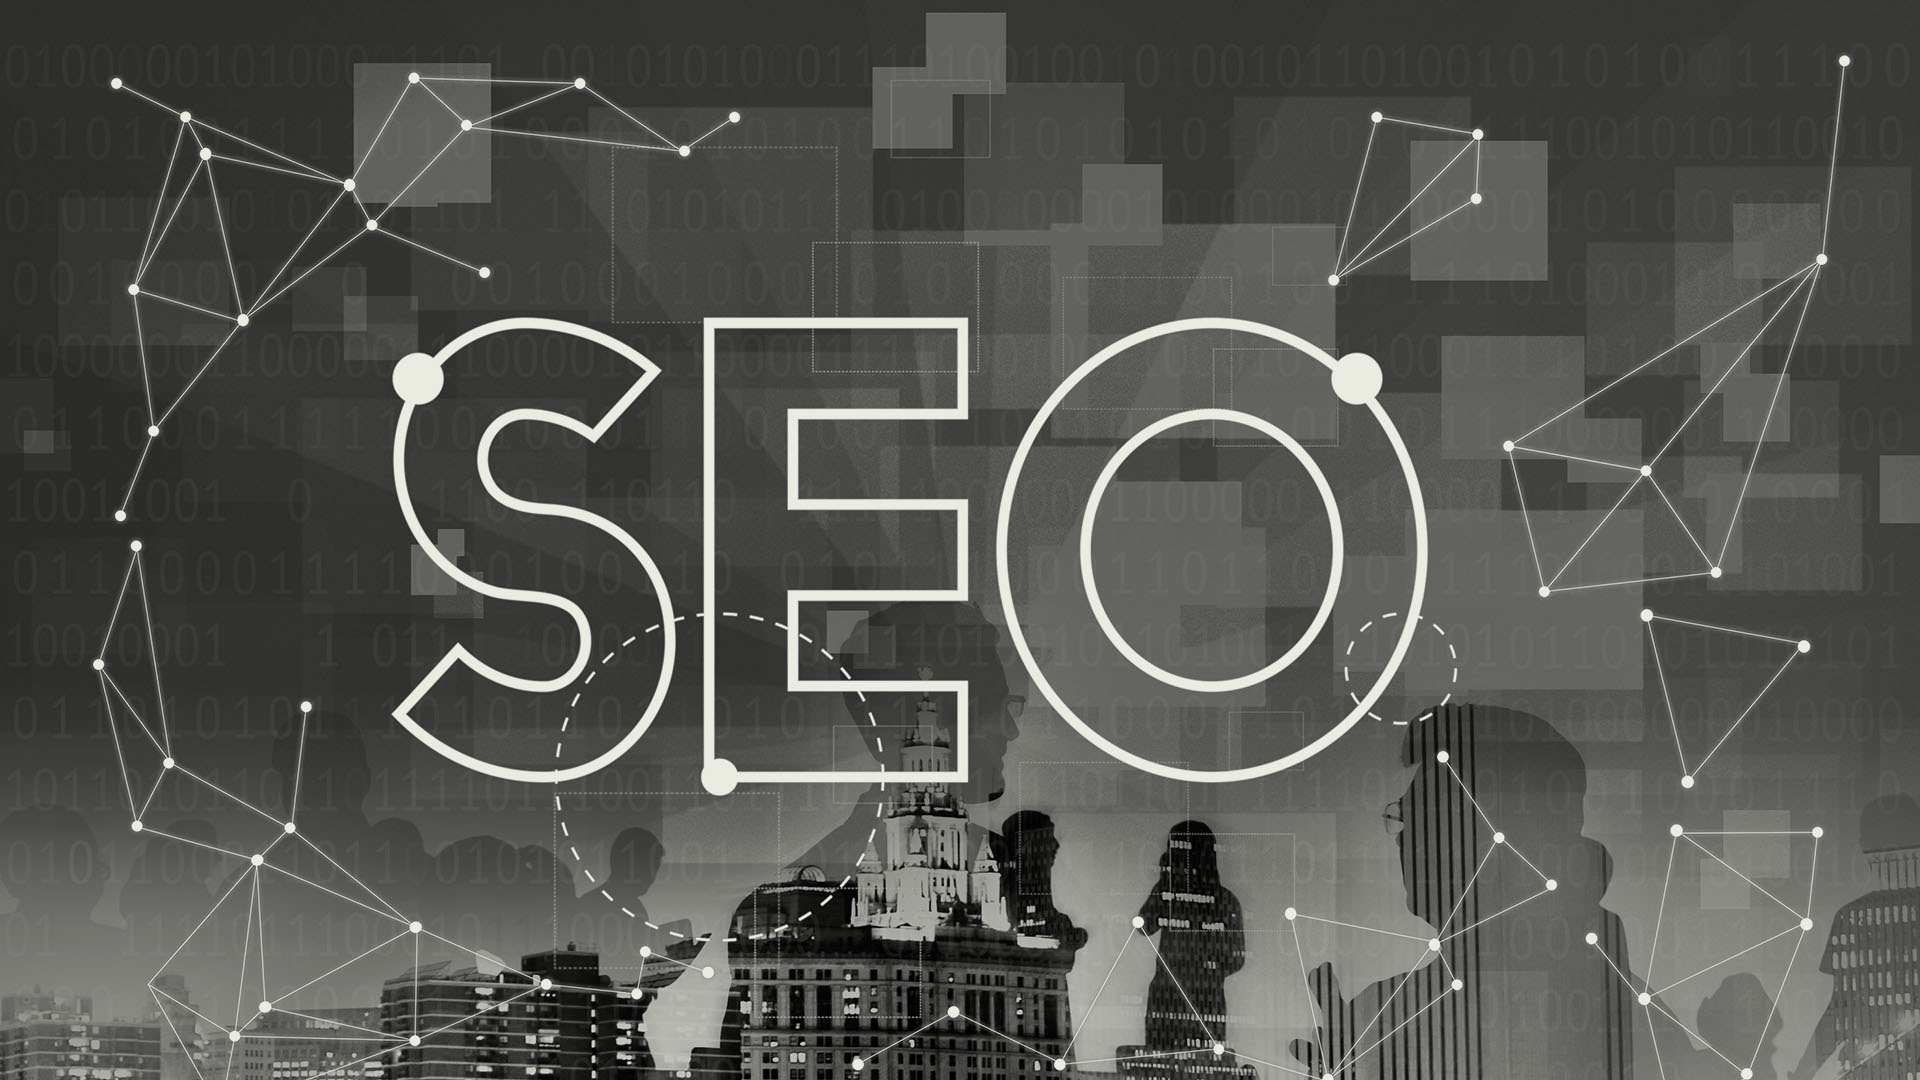 what are SEO Services